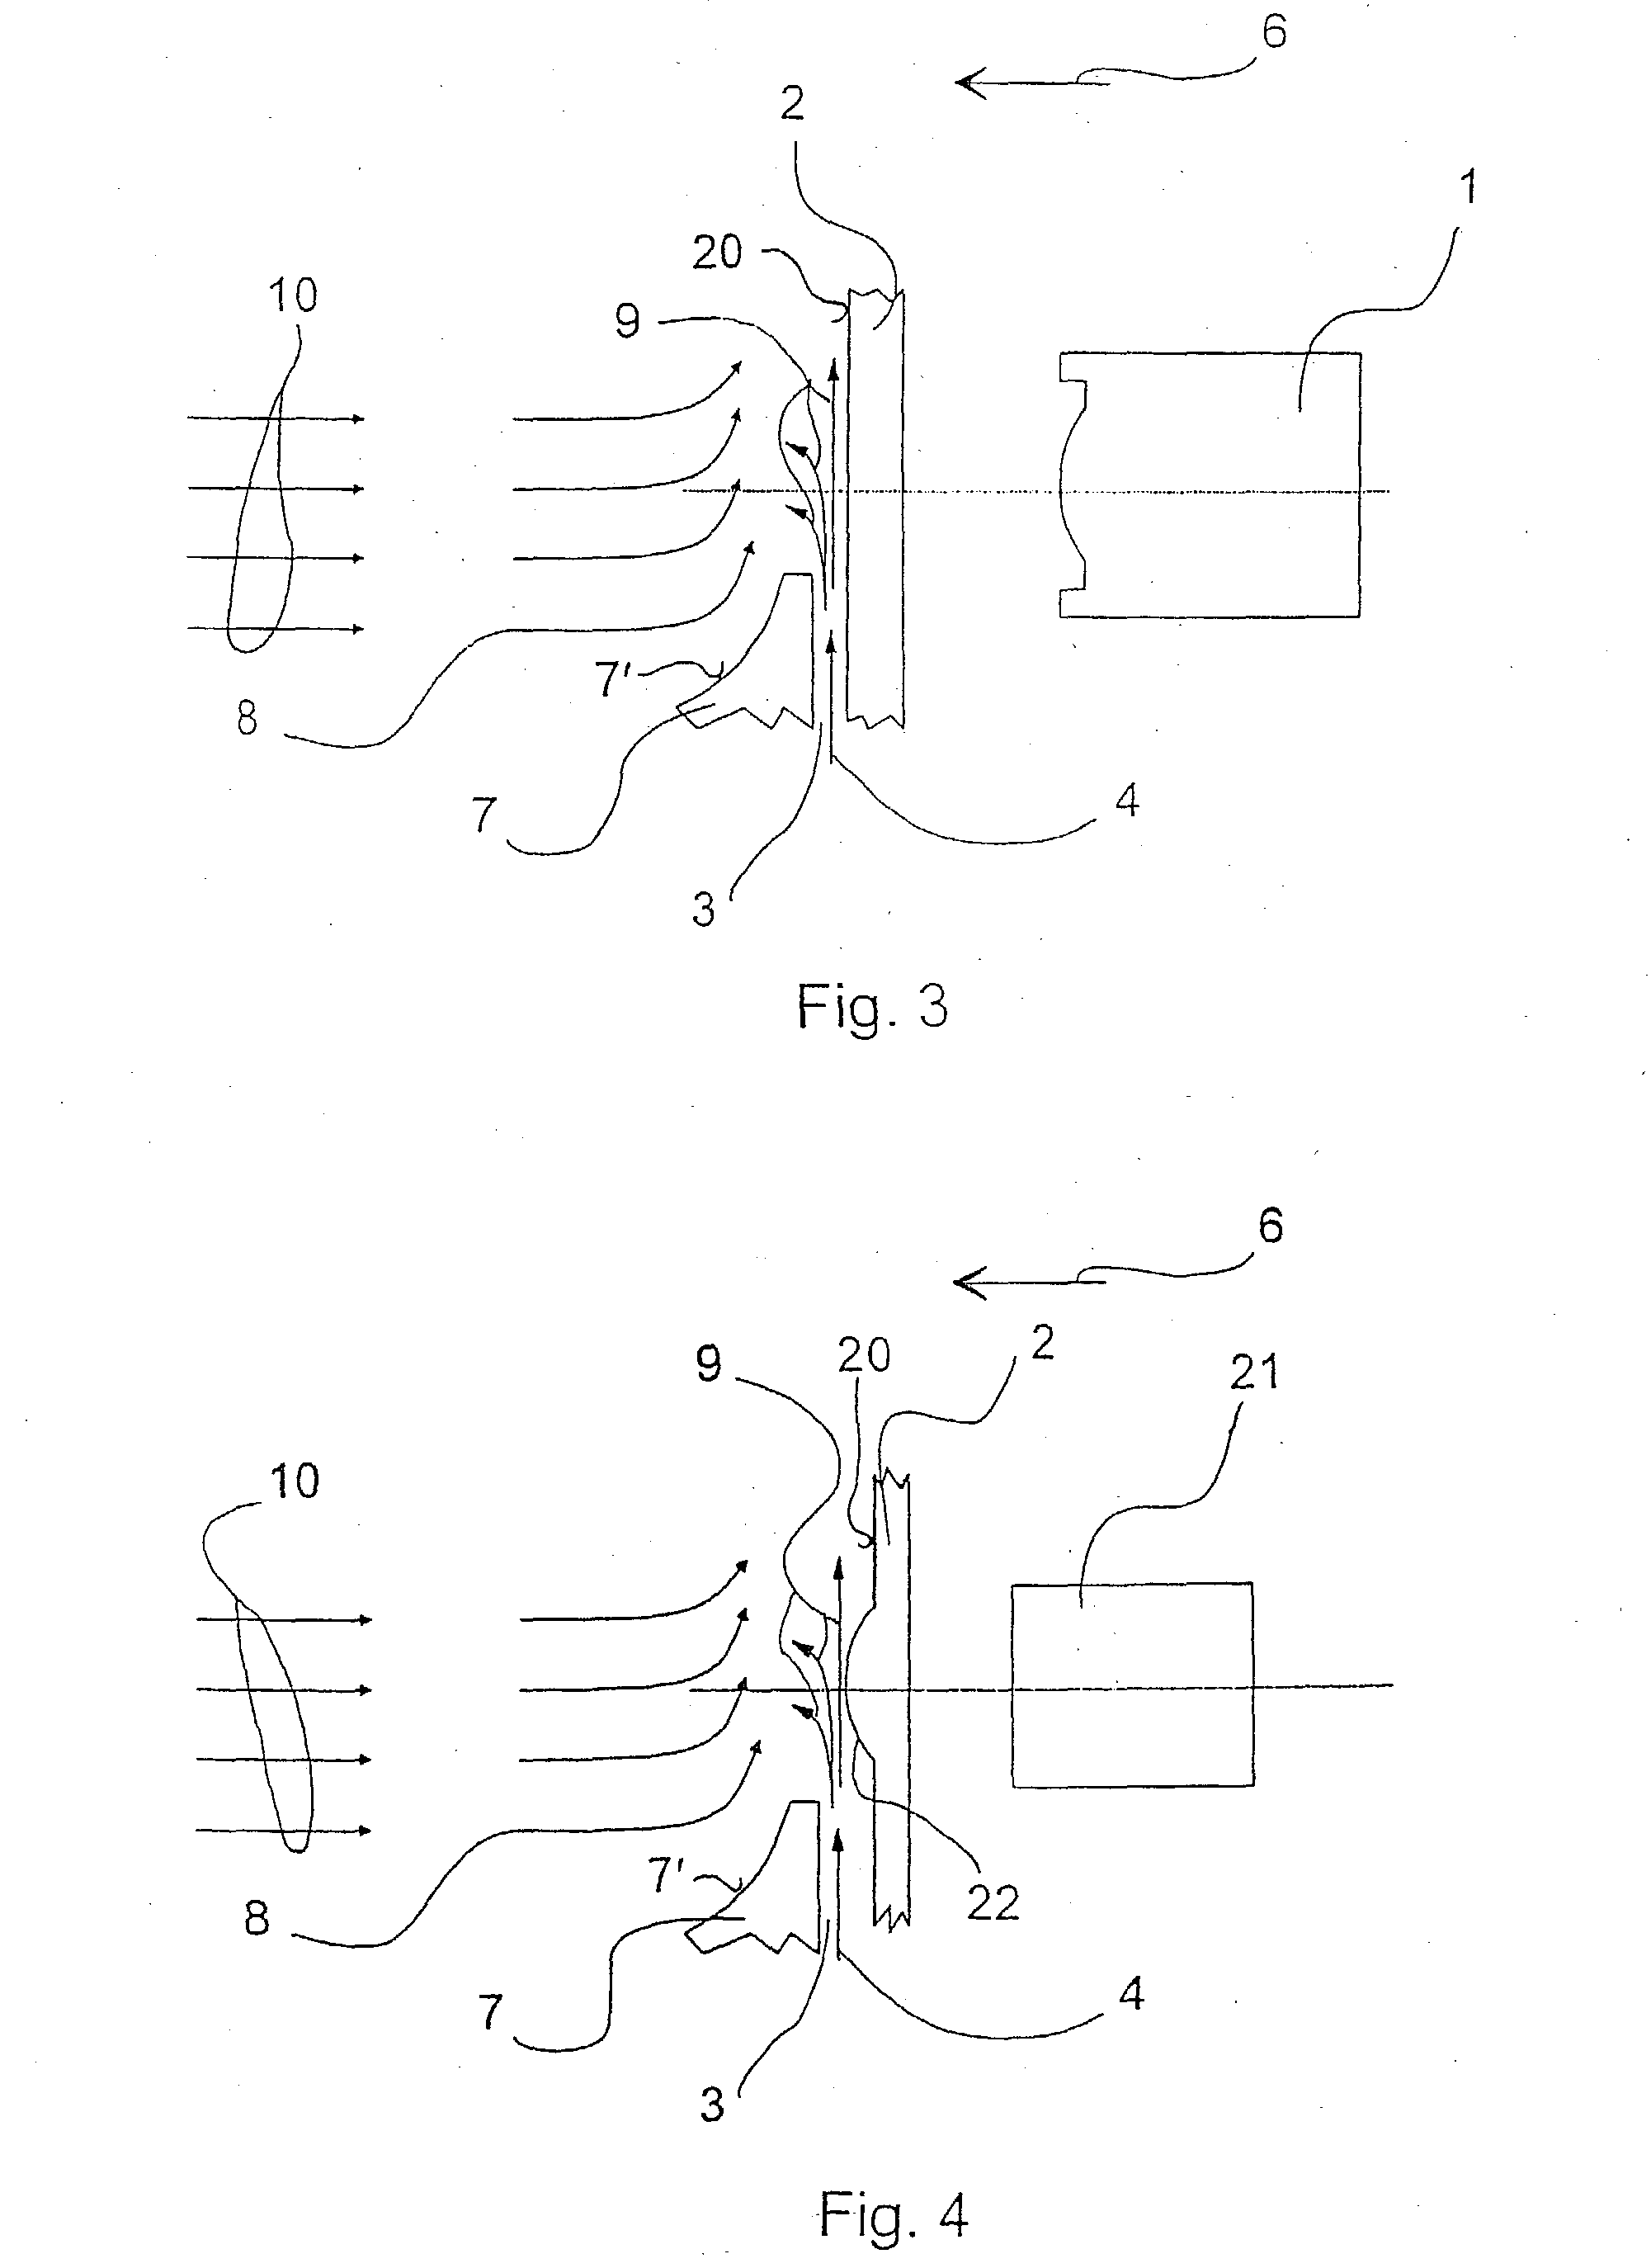 Device for keeping clean optical elements on motor vehicle clean, in particular covers for sensors or cameras